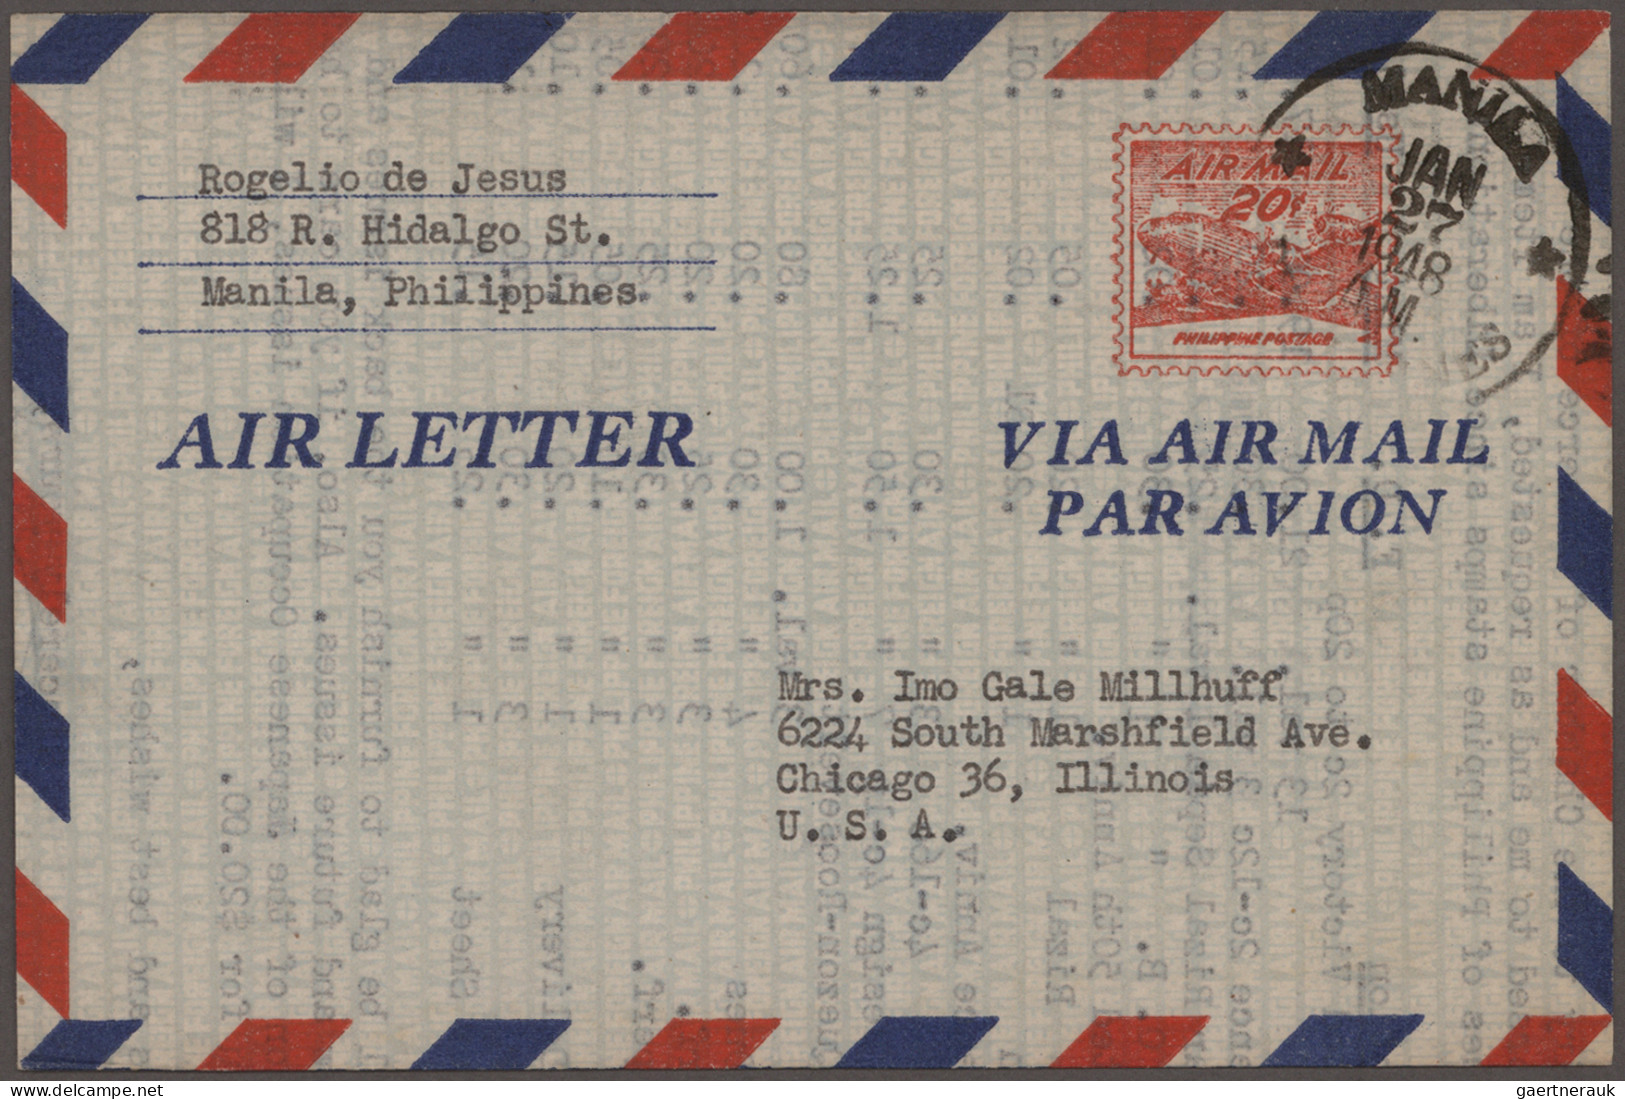 Philippines: 1880's-1980 ca.: More than 400 covers, postcards and postal station